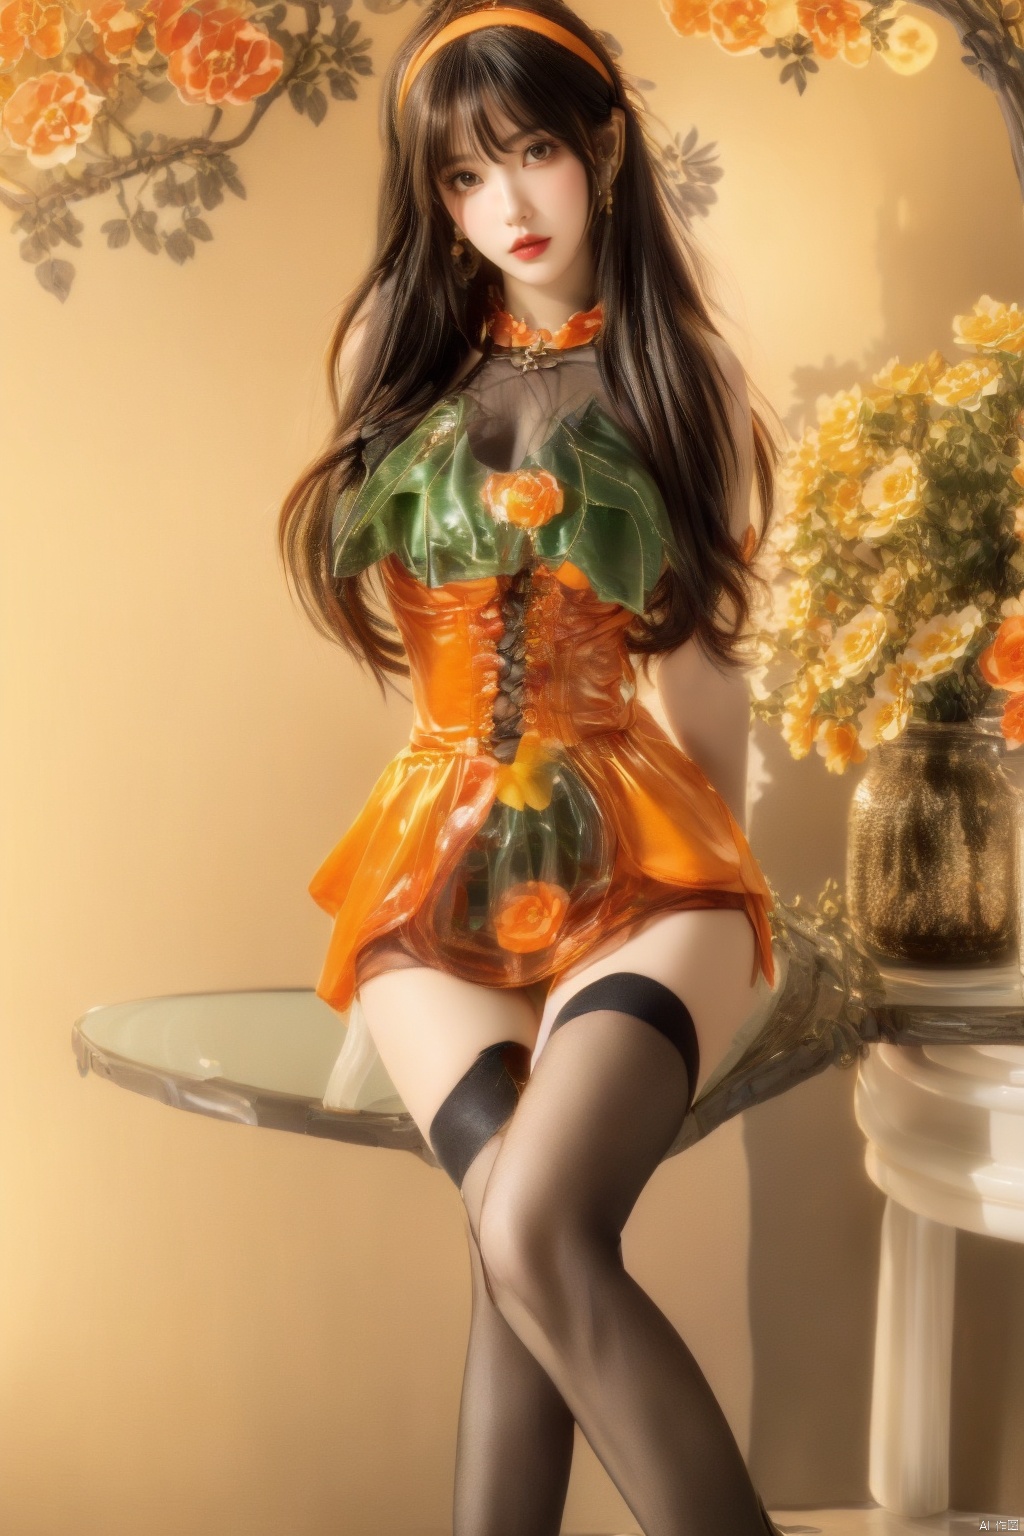  orange theme ,(flowers background:1.45),(transparent background:1.3)(an extremely delicate and beautiful girl inside of glass jar:1.2), (glass jar:1.35),(solo:1.2), (full body), (beautiful detailed eyes, beautiful detailed face:1.3), (sitting ), (very long silky hair, float white hair:1.15), (medium_breasts, tally and skinny:1.2), (Colorful dress:1.3), (extremely detailed lace:0.3), (insanely detailed frills:0.3),(hairband , orange hair_ornament:1.25),orange cans,water surface,full body,kneeing,(bottle filled with orange water,bottle filled with Fanta:1.25), (many fruits in jar, many Sliced_fruits in jar:1.25), (many bubbles:1.25), 1girl,police,yellow_dress,polka_dot_legwear